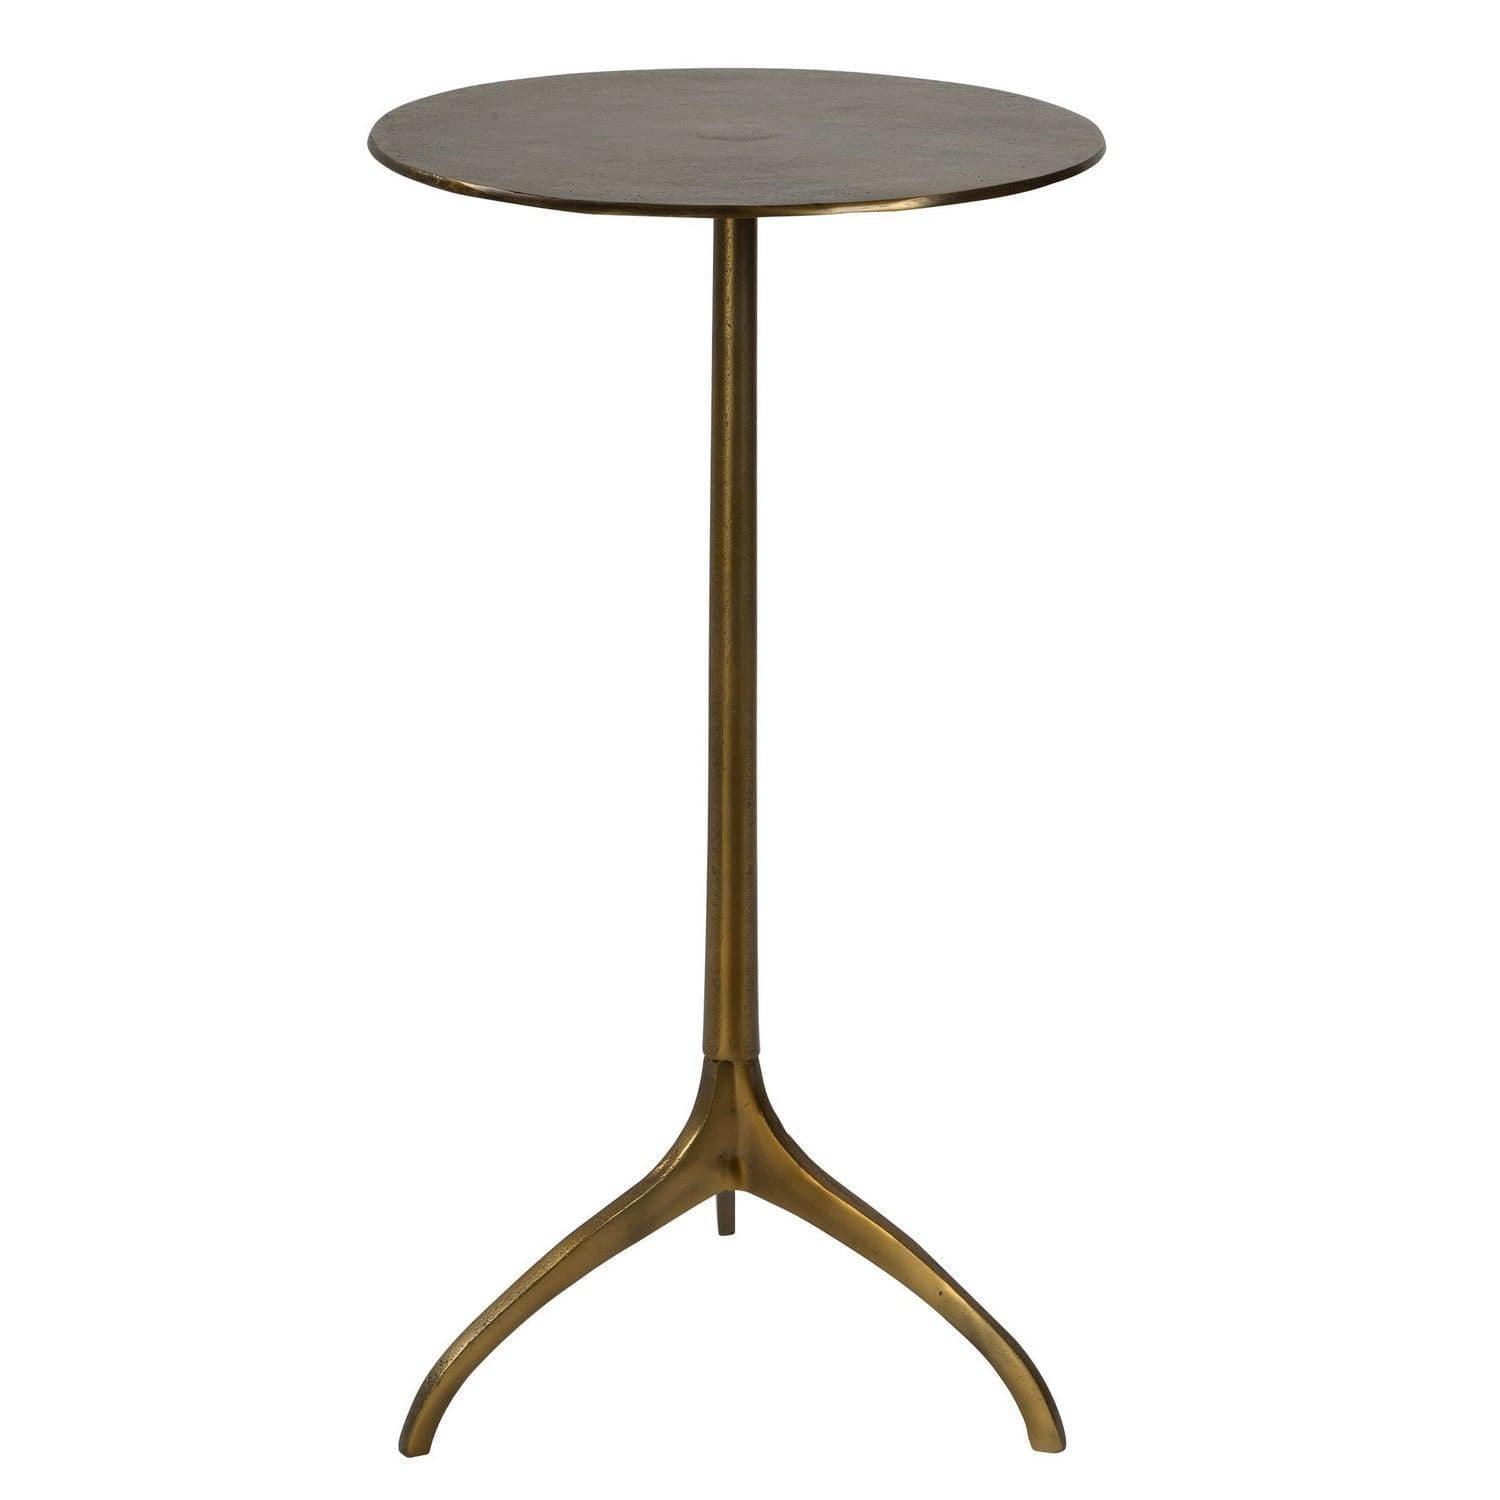 The Uttermost - Beacon Accent Table - 25149 | Montreal Lighting & Hardware